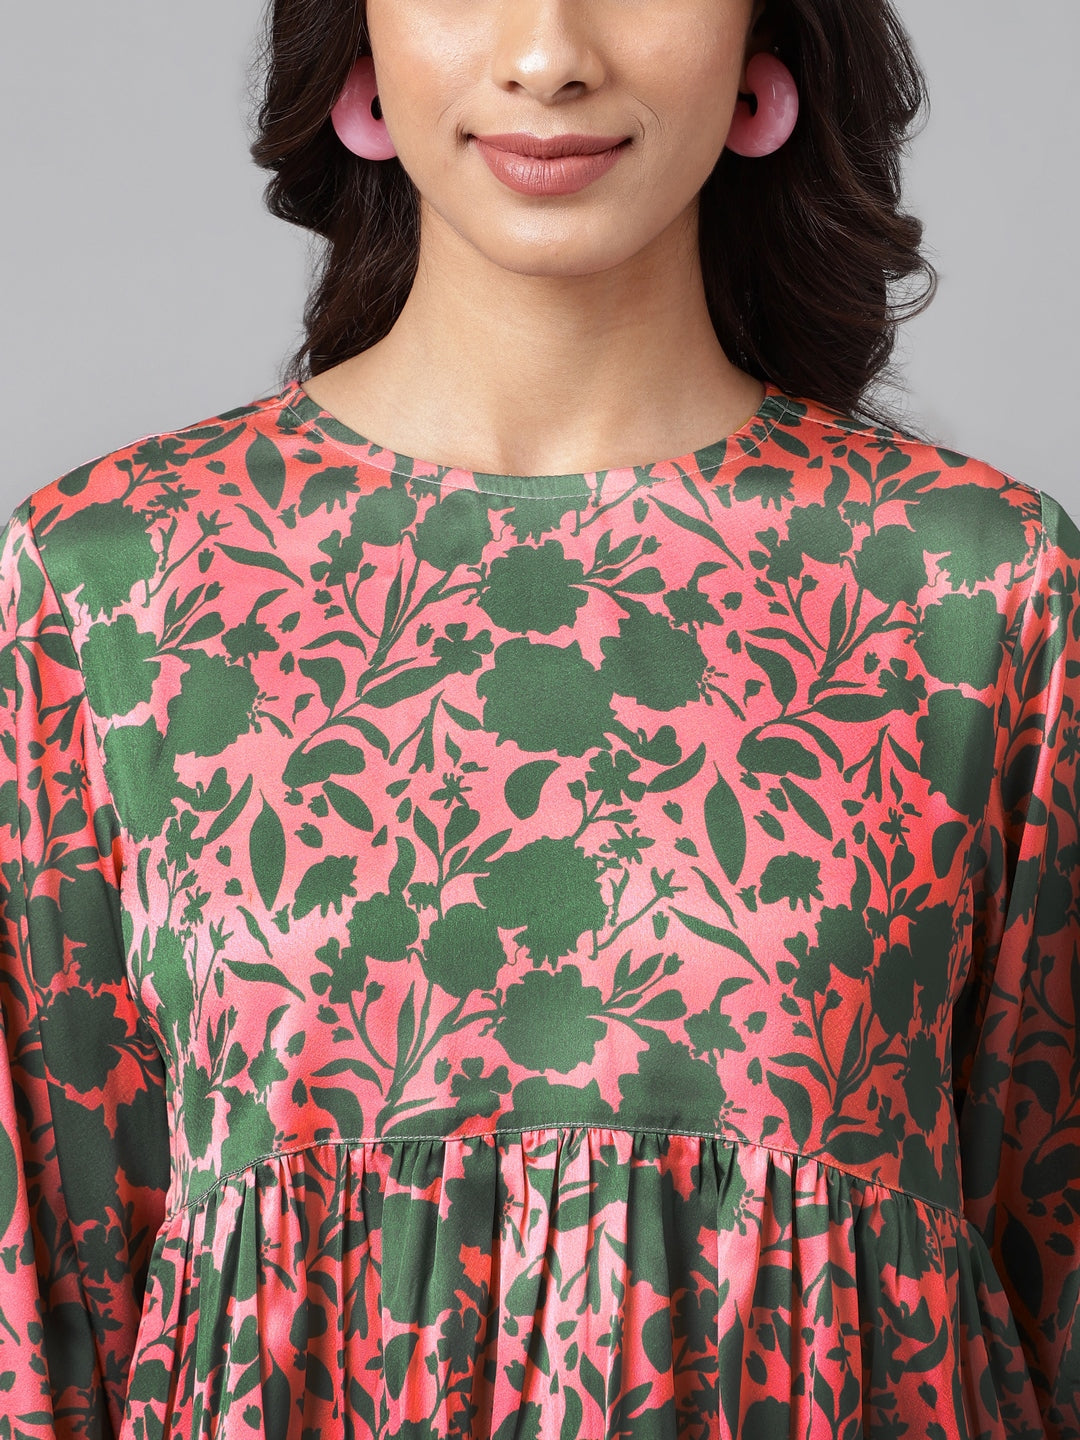 Pink Satin Top with Olive Green Abstract Prints